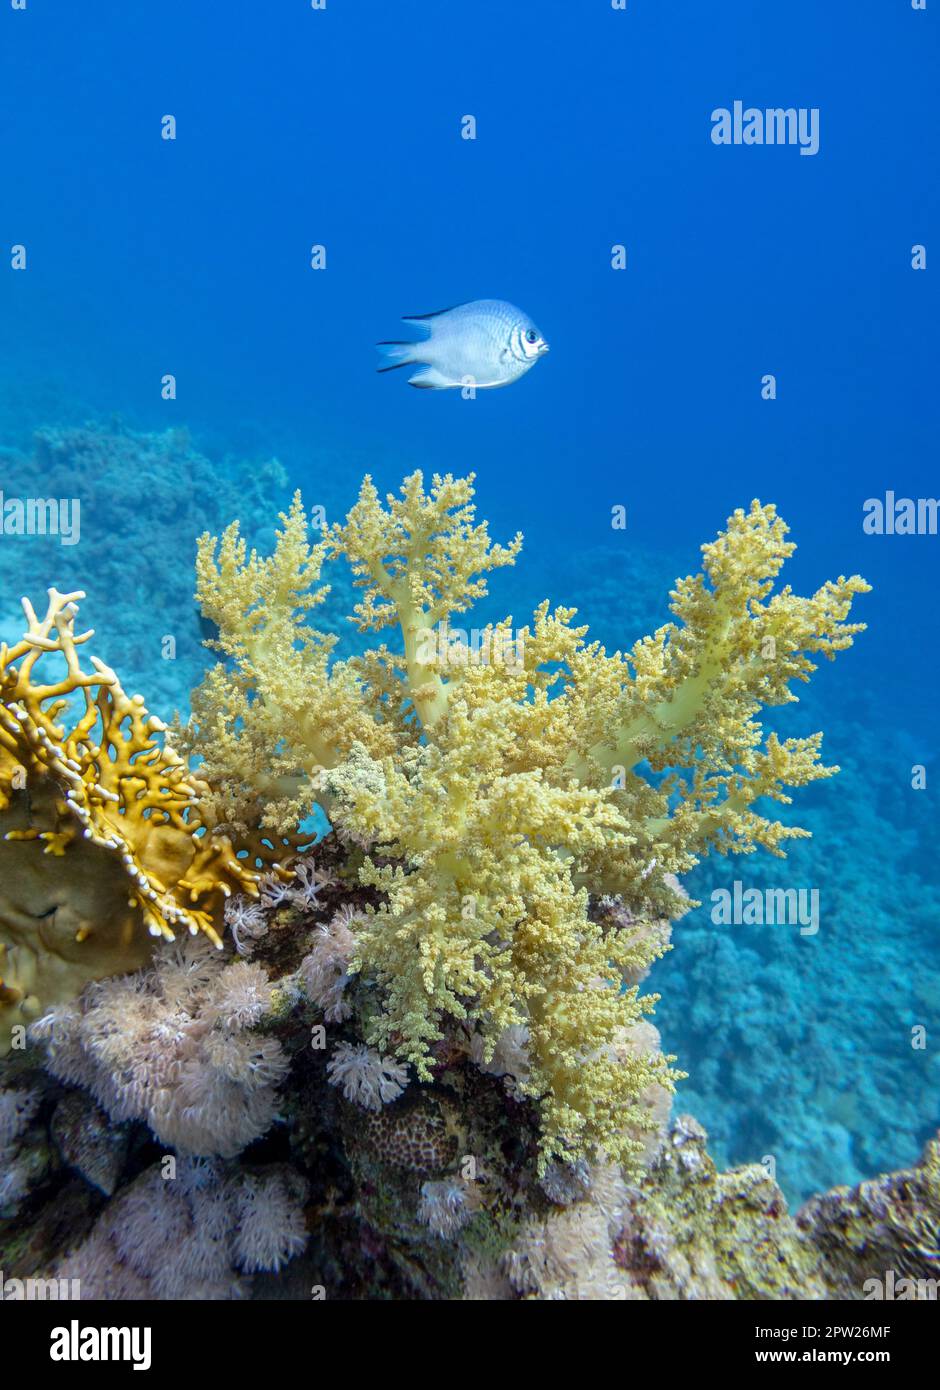 Colorful coral reef at the bottom of tropical sea, yellow broccoli coral, underwater landscape Stock Photo